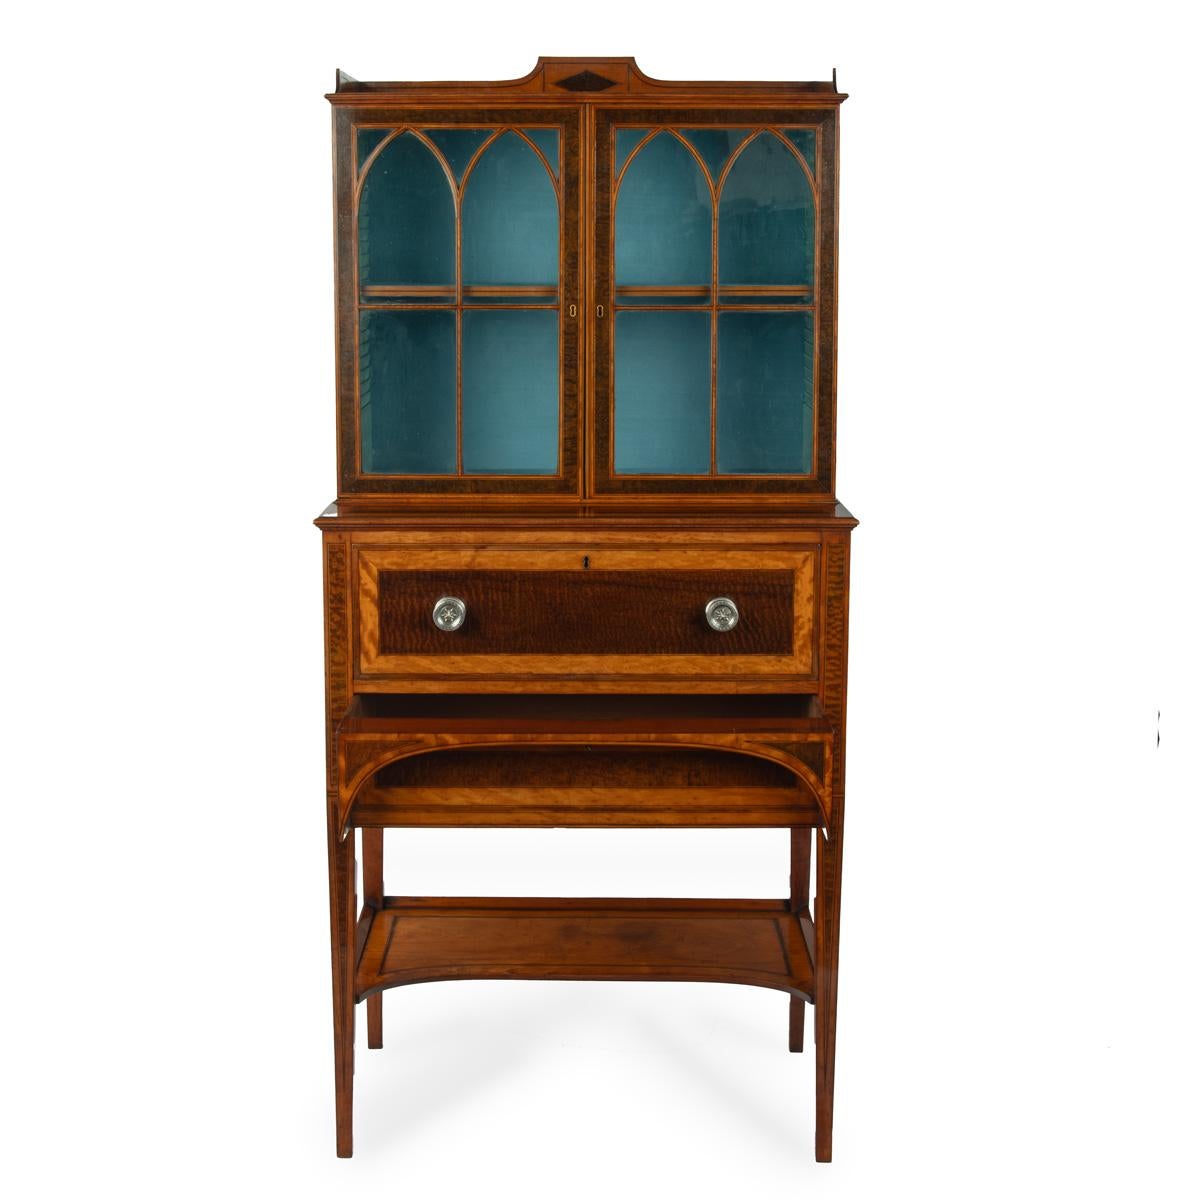 A fine late George III satinwood and snakewood secretaire cabinet In Good Condition For Sale In Lymington, Hampshire